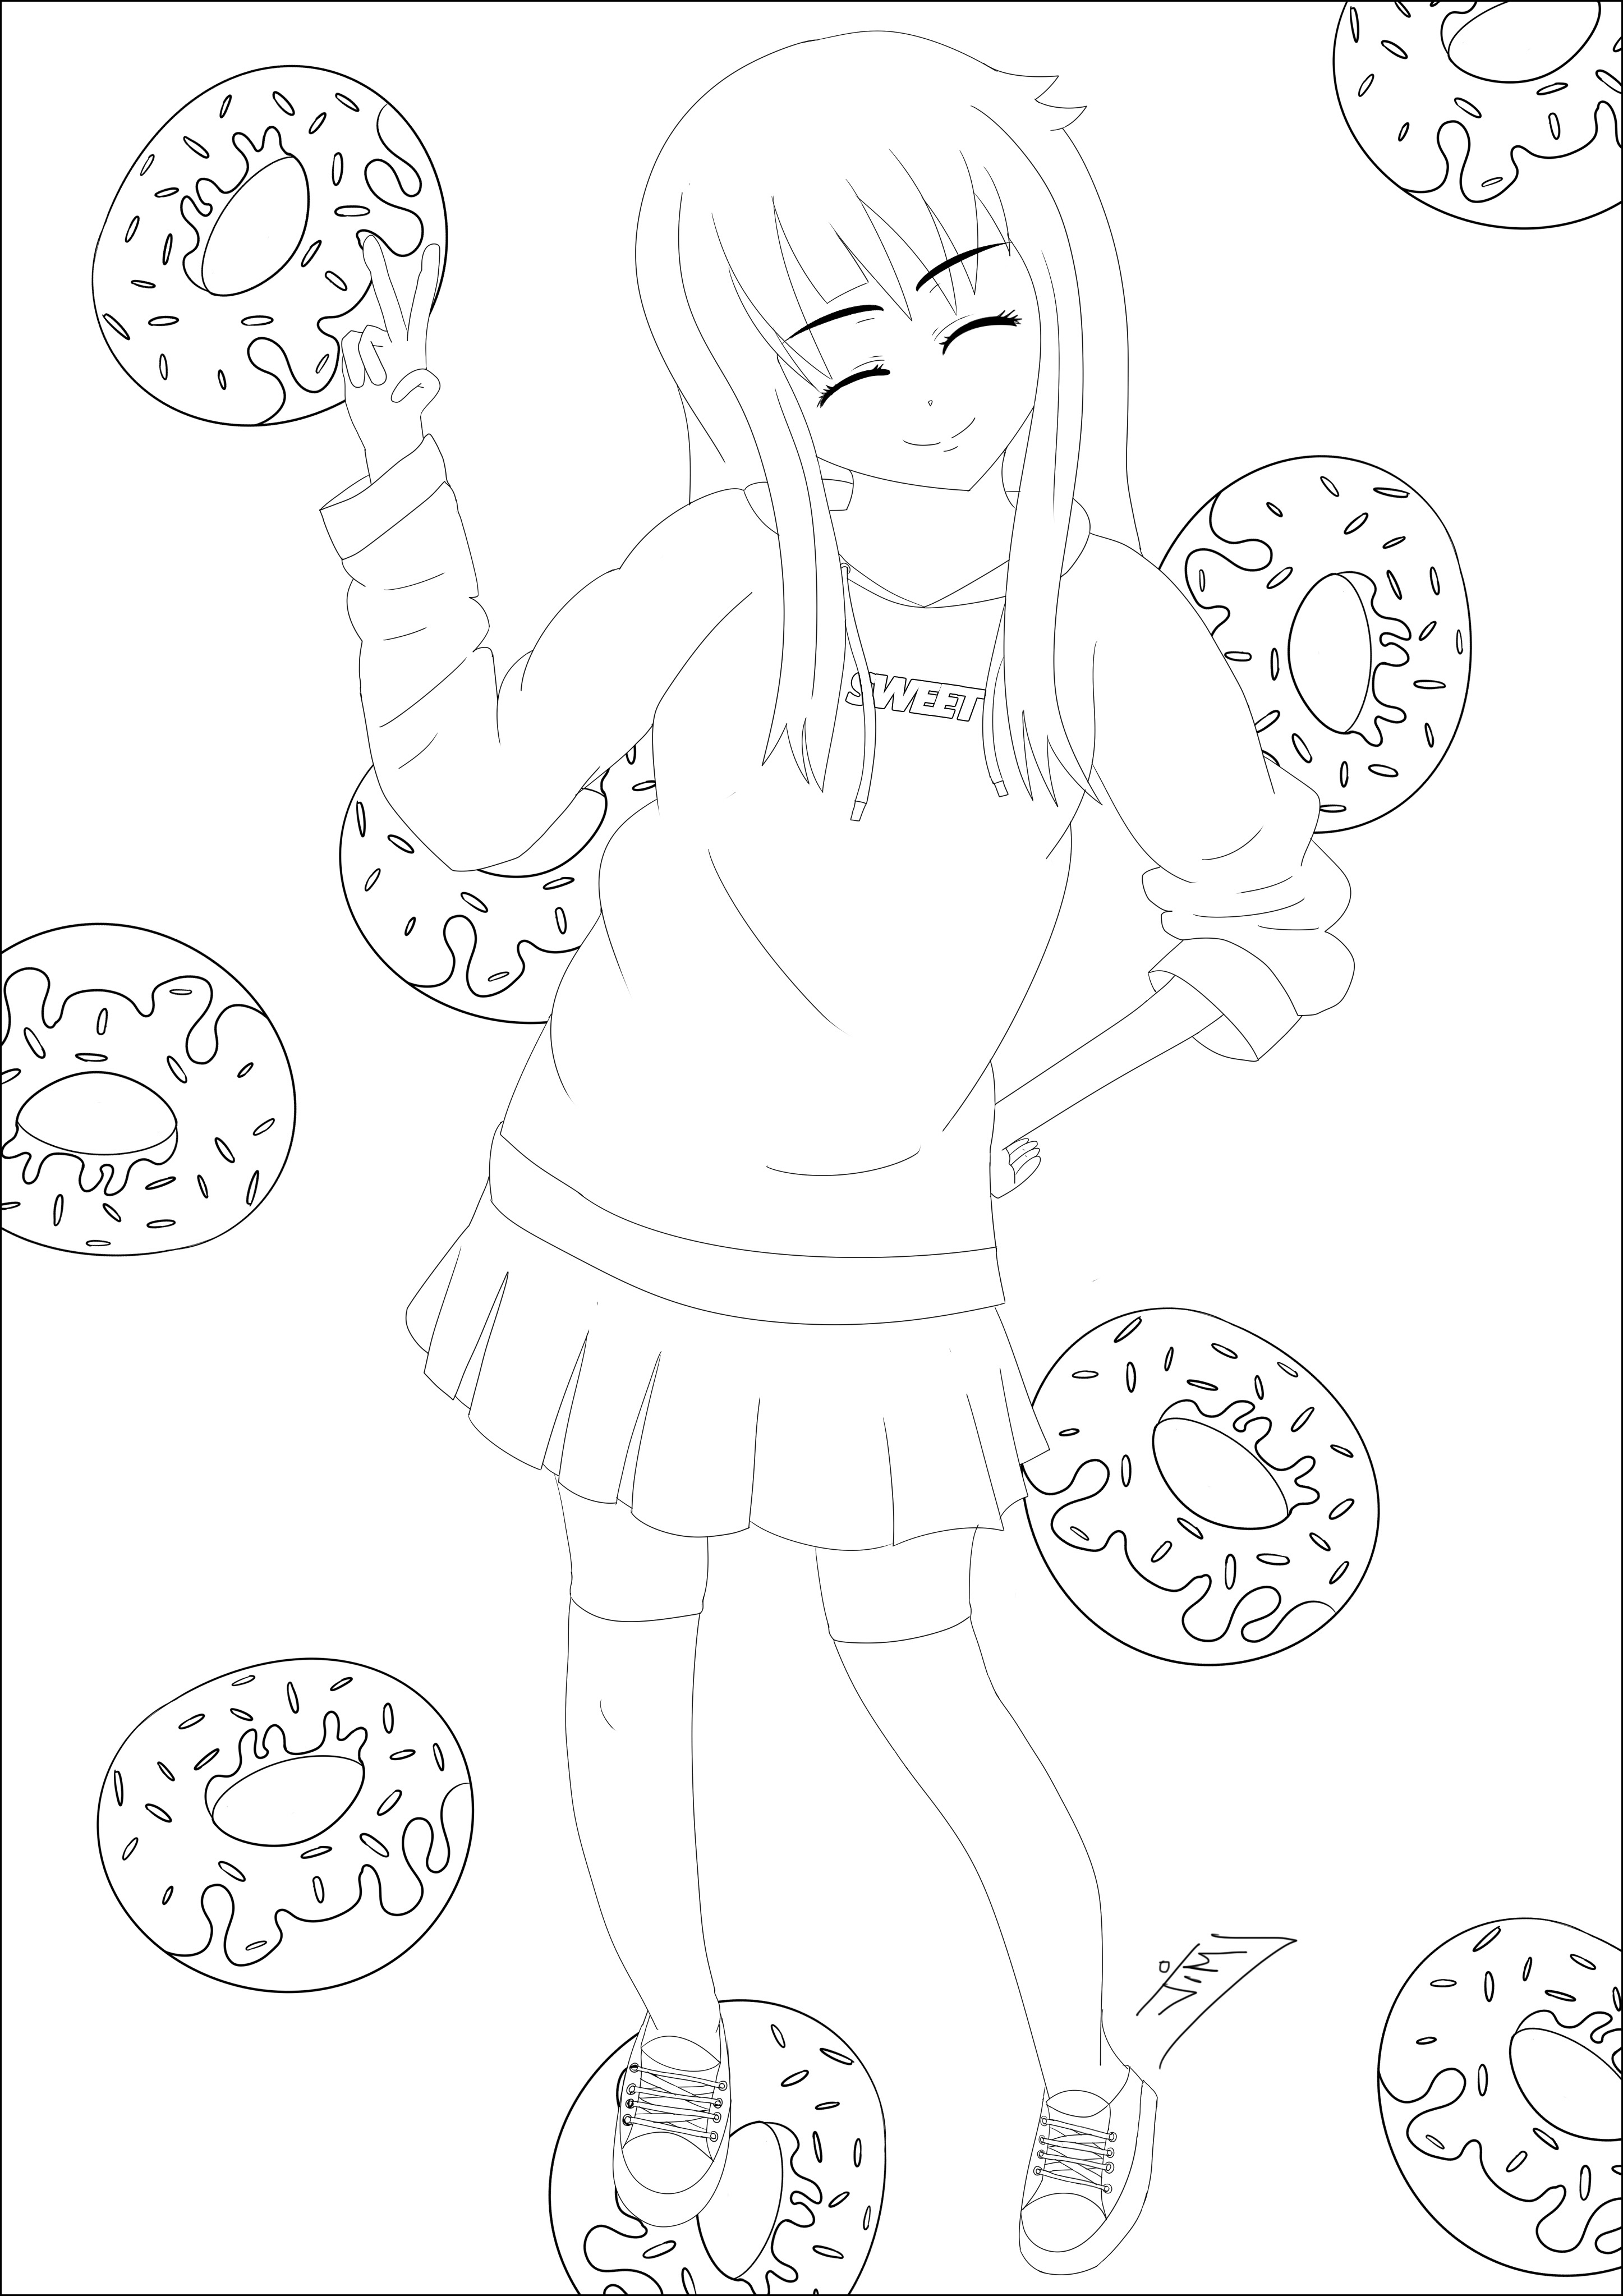 A young girl with a waterfall of Donuts ! Drawing influenced by Mangas / Animes